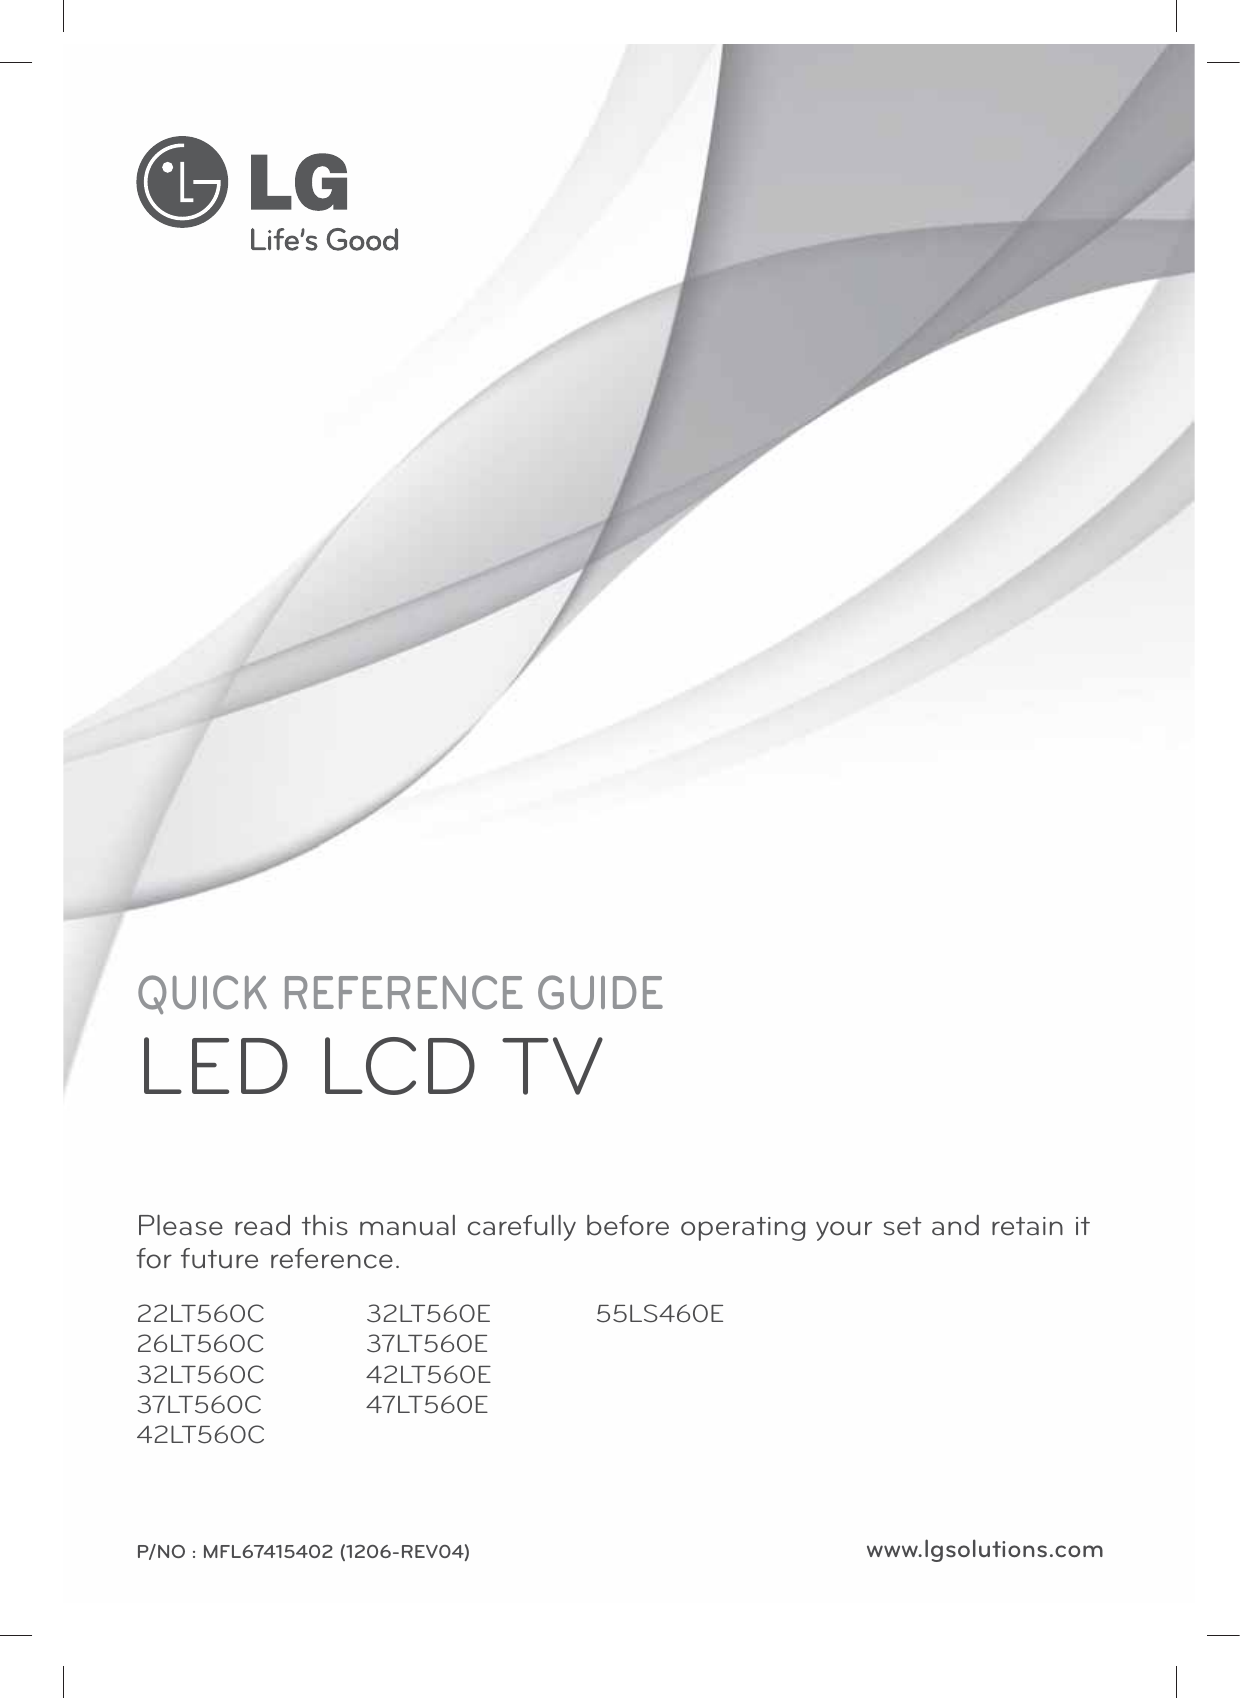 www.lgsolutions.comQUICK REFERENCE GUIDELED LCD TVPlease read this manual carefully before operating your set and retain it for future reference.P/NO : MFL67415402 (1206-REV04)22LT560C26LT560C32LT560C37LT560C42LT560C32LT560E37LT560E42LT560E47LT560E55LS460E